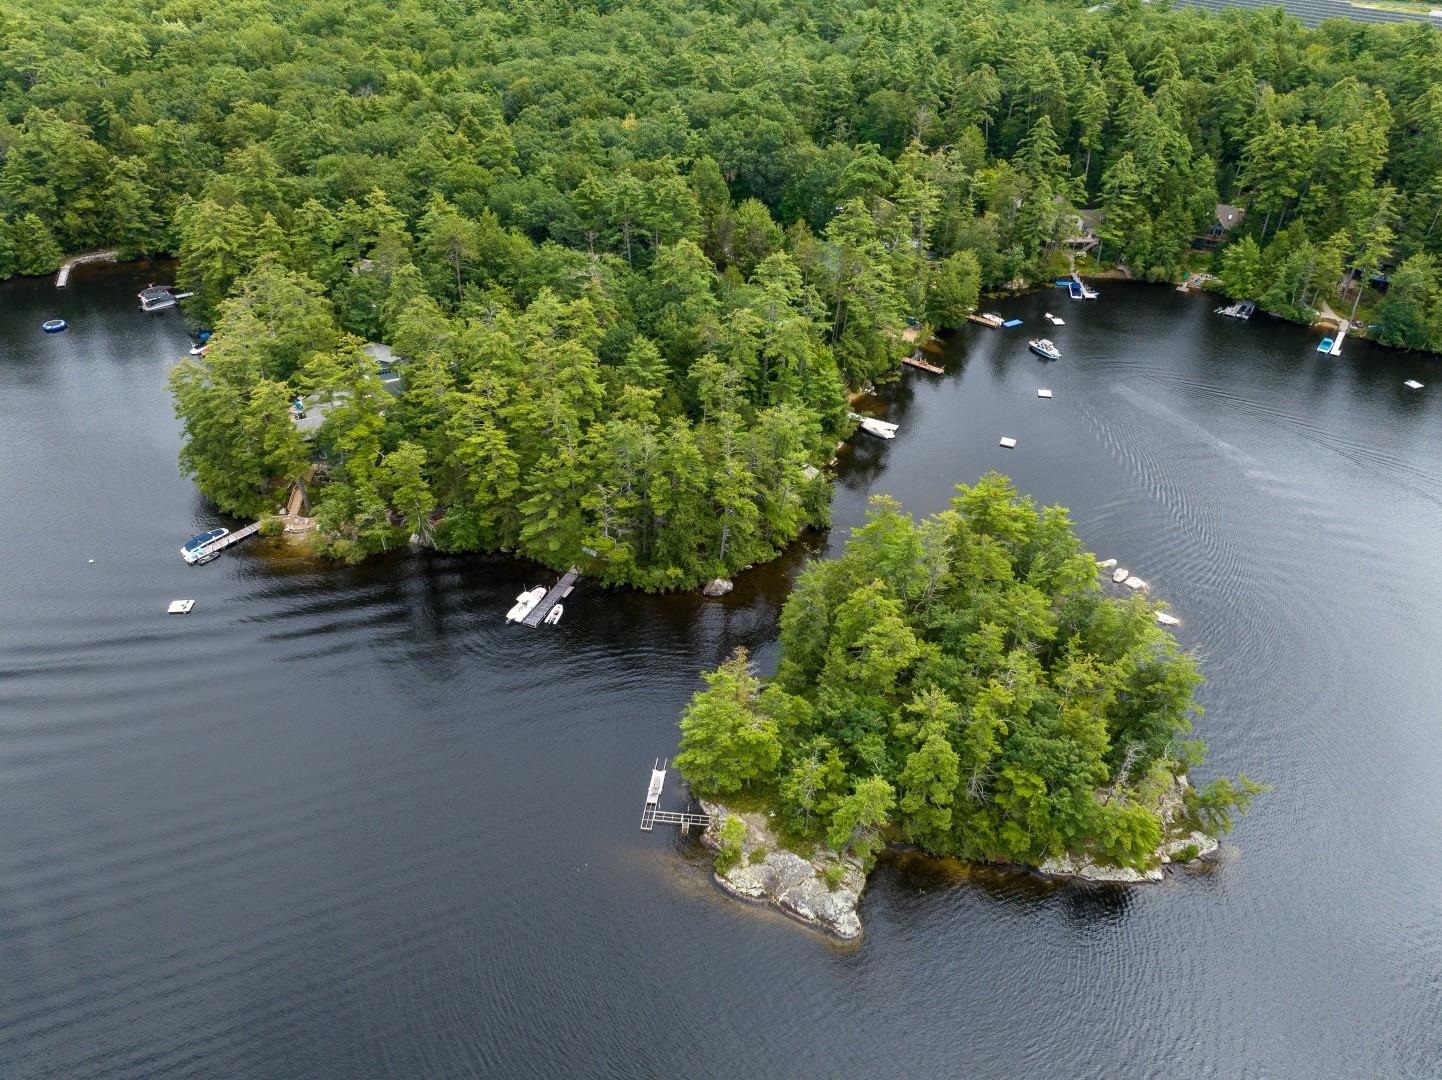 MLS 4992188: Starr Island and First Point Road, Moultonborough NH